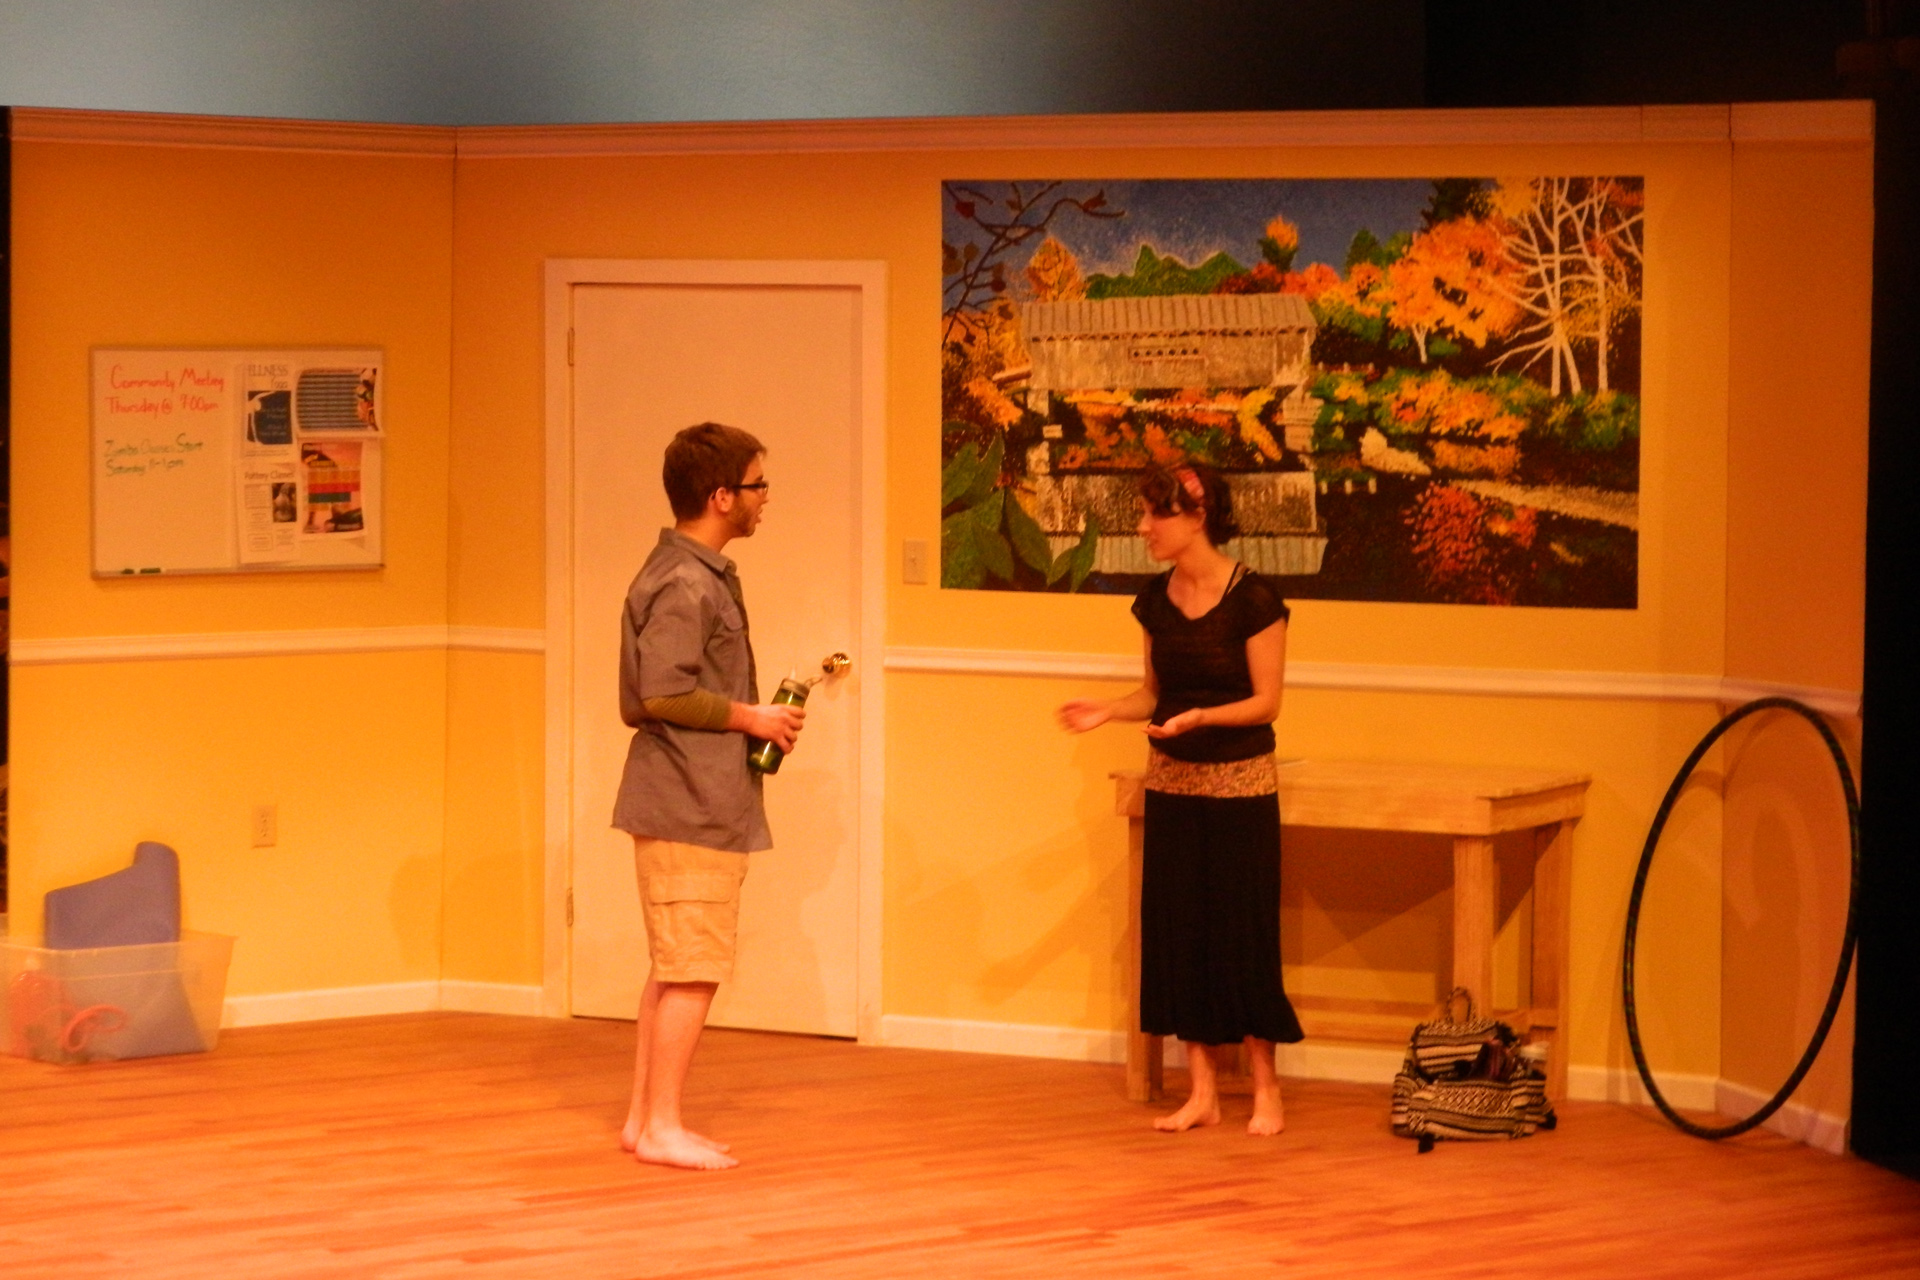 Actor and actress facing eachother in a yellow room with a painting on the wall